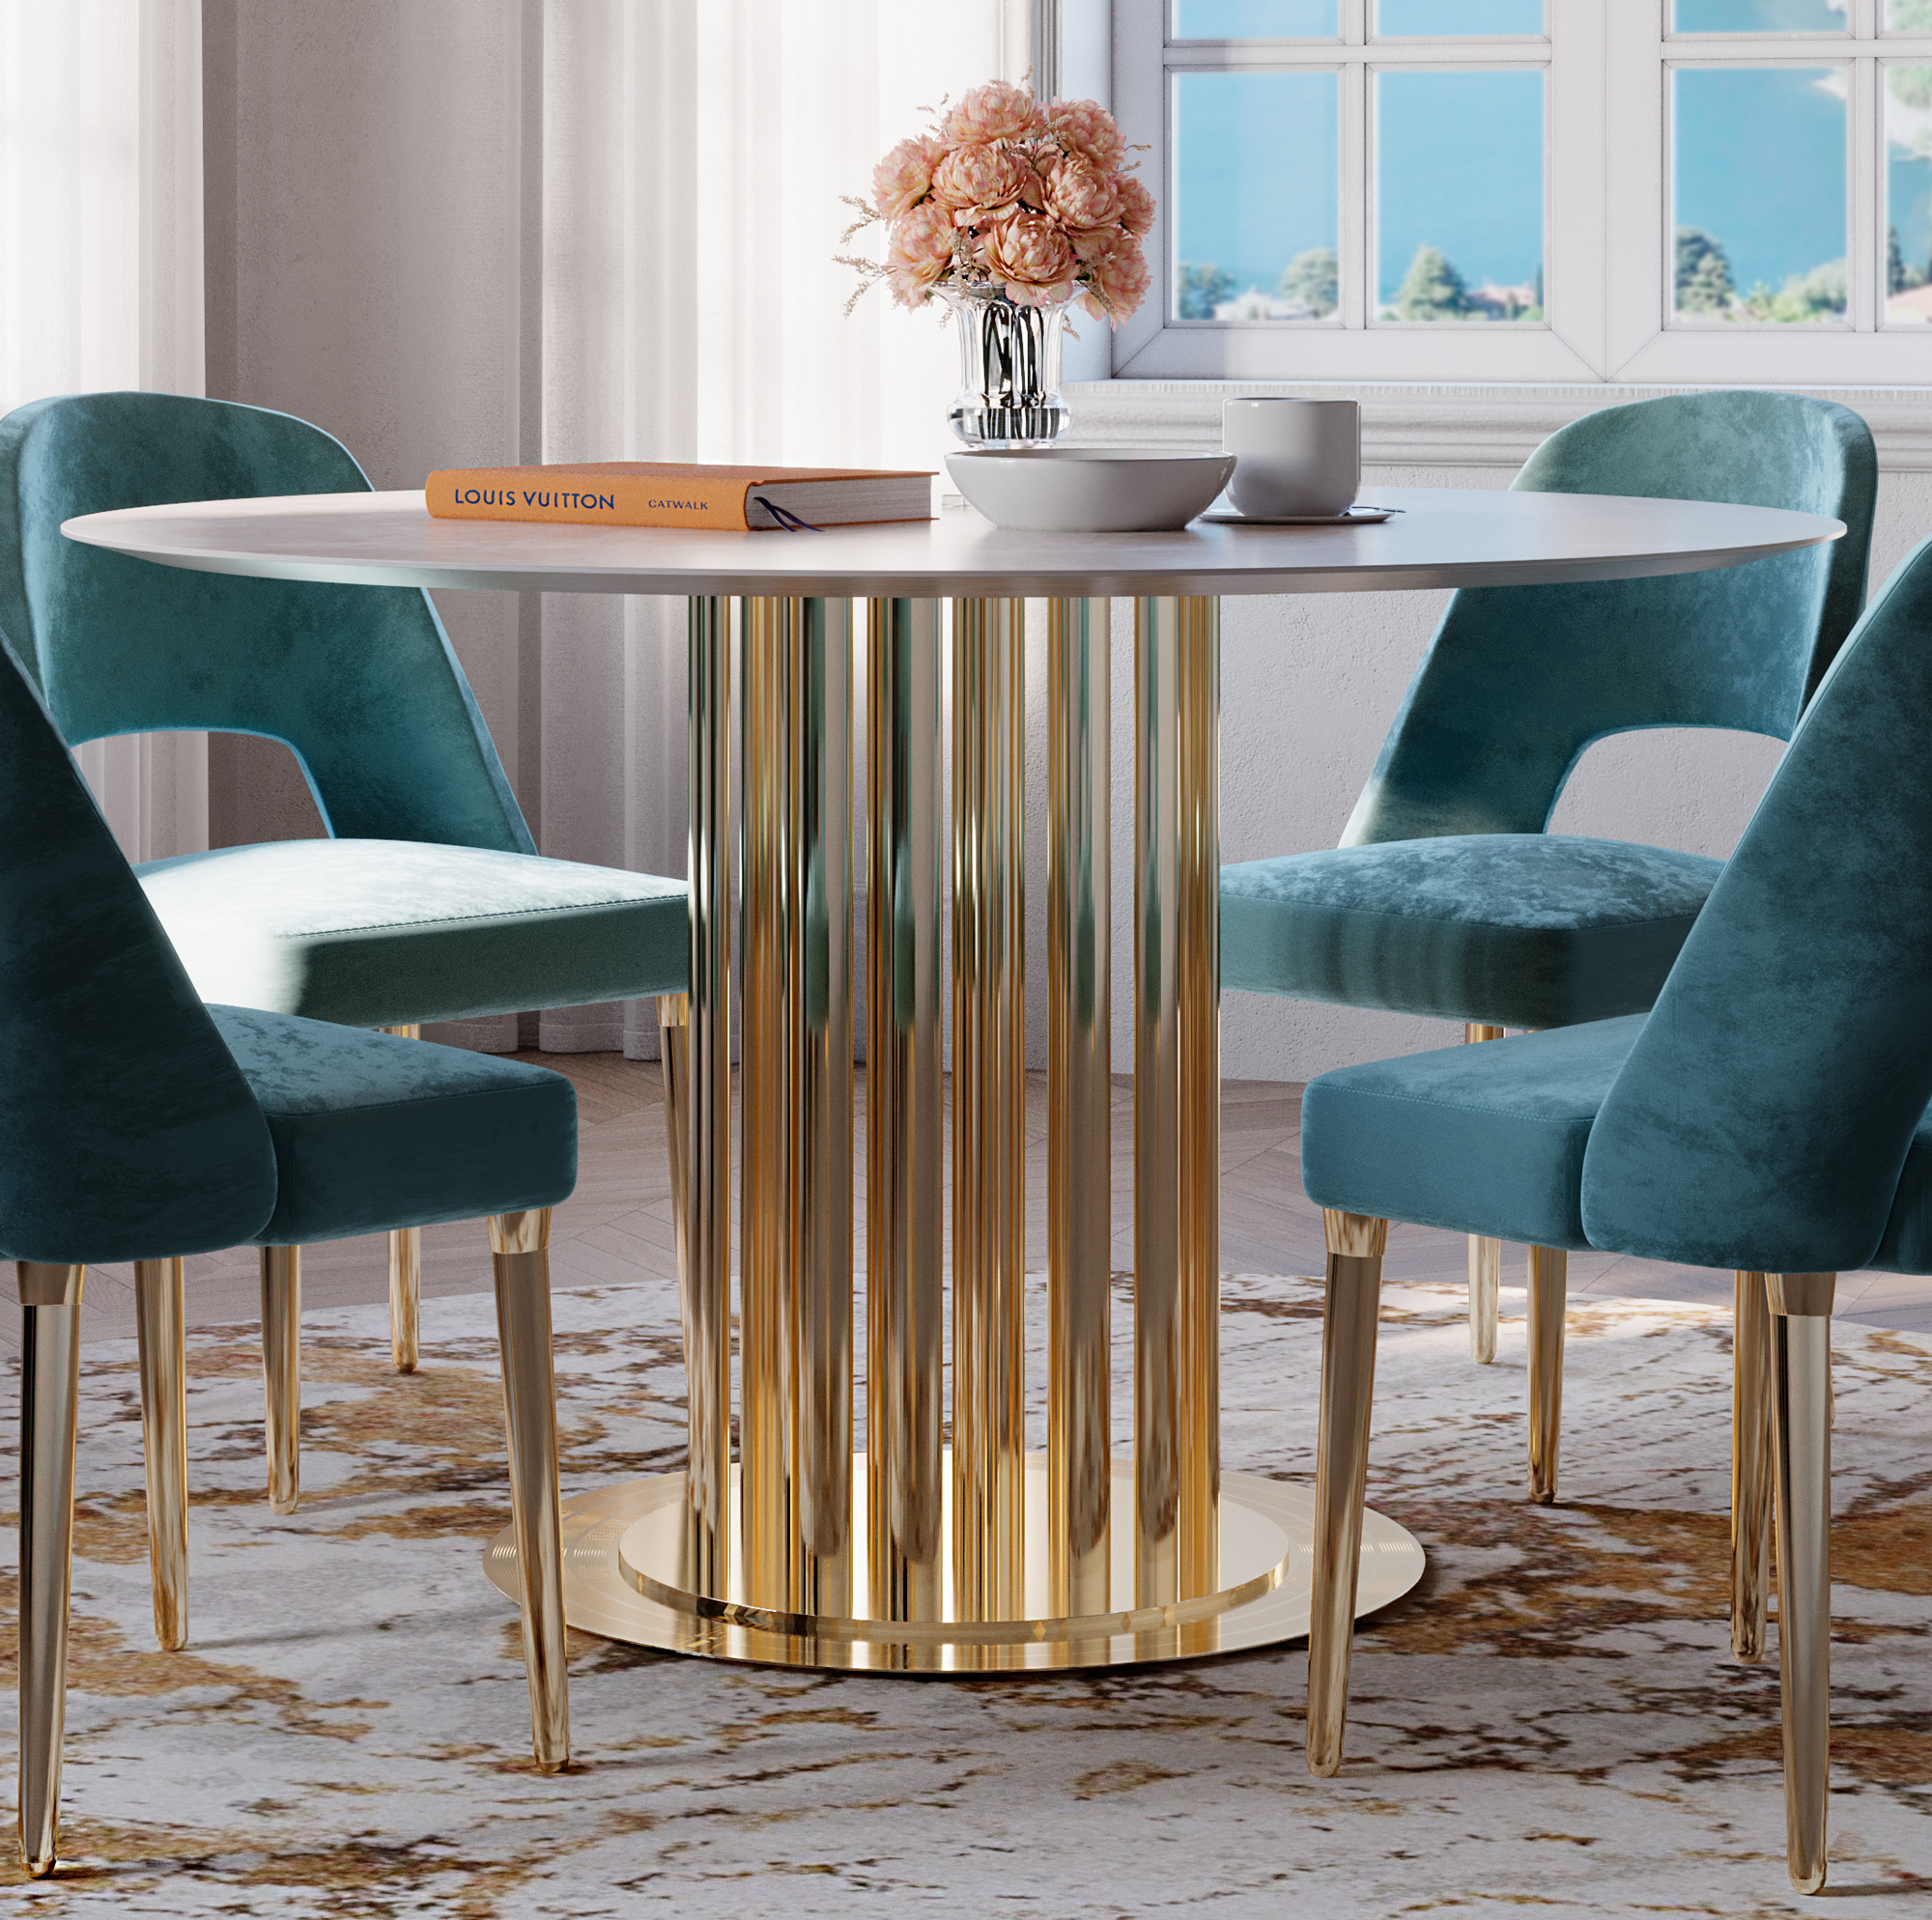 Modern Round Marble Dining Table